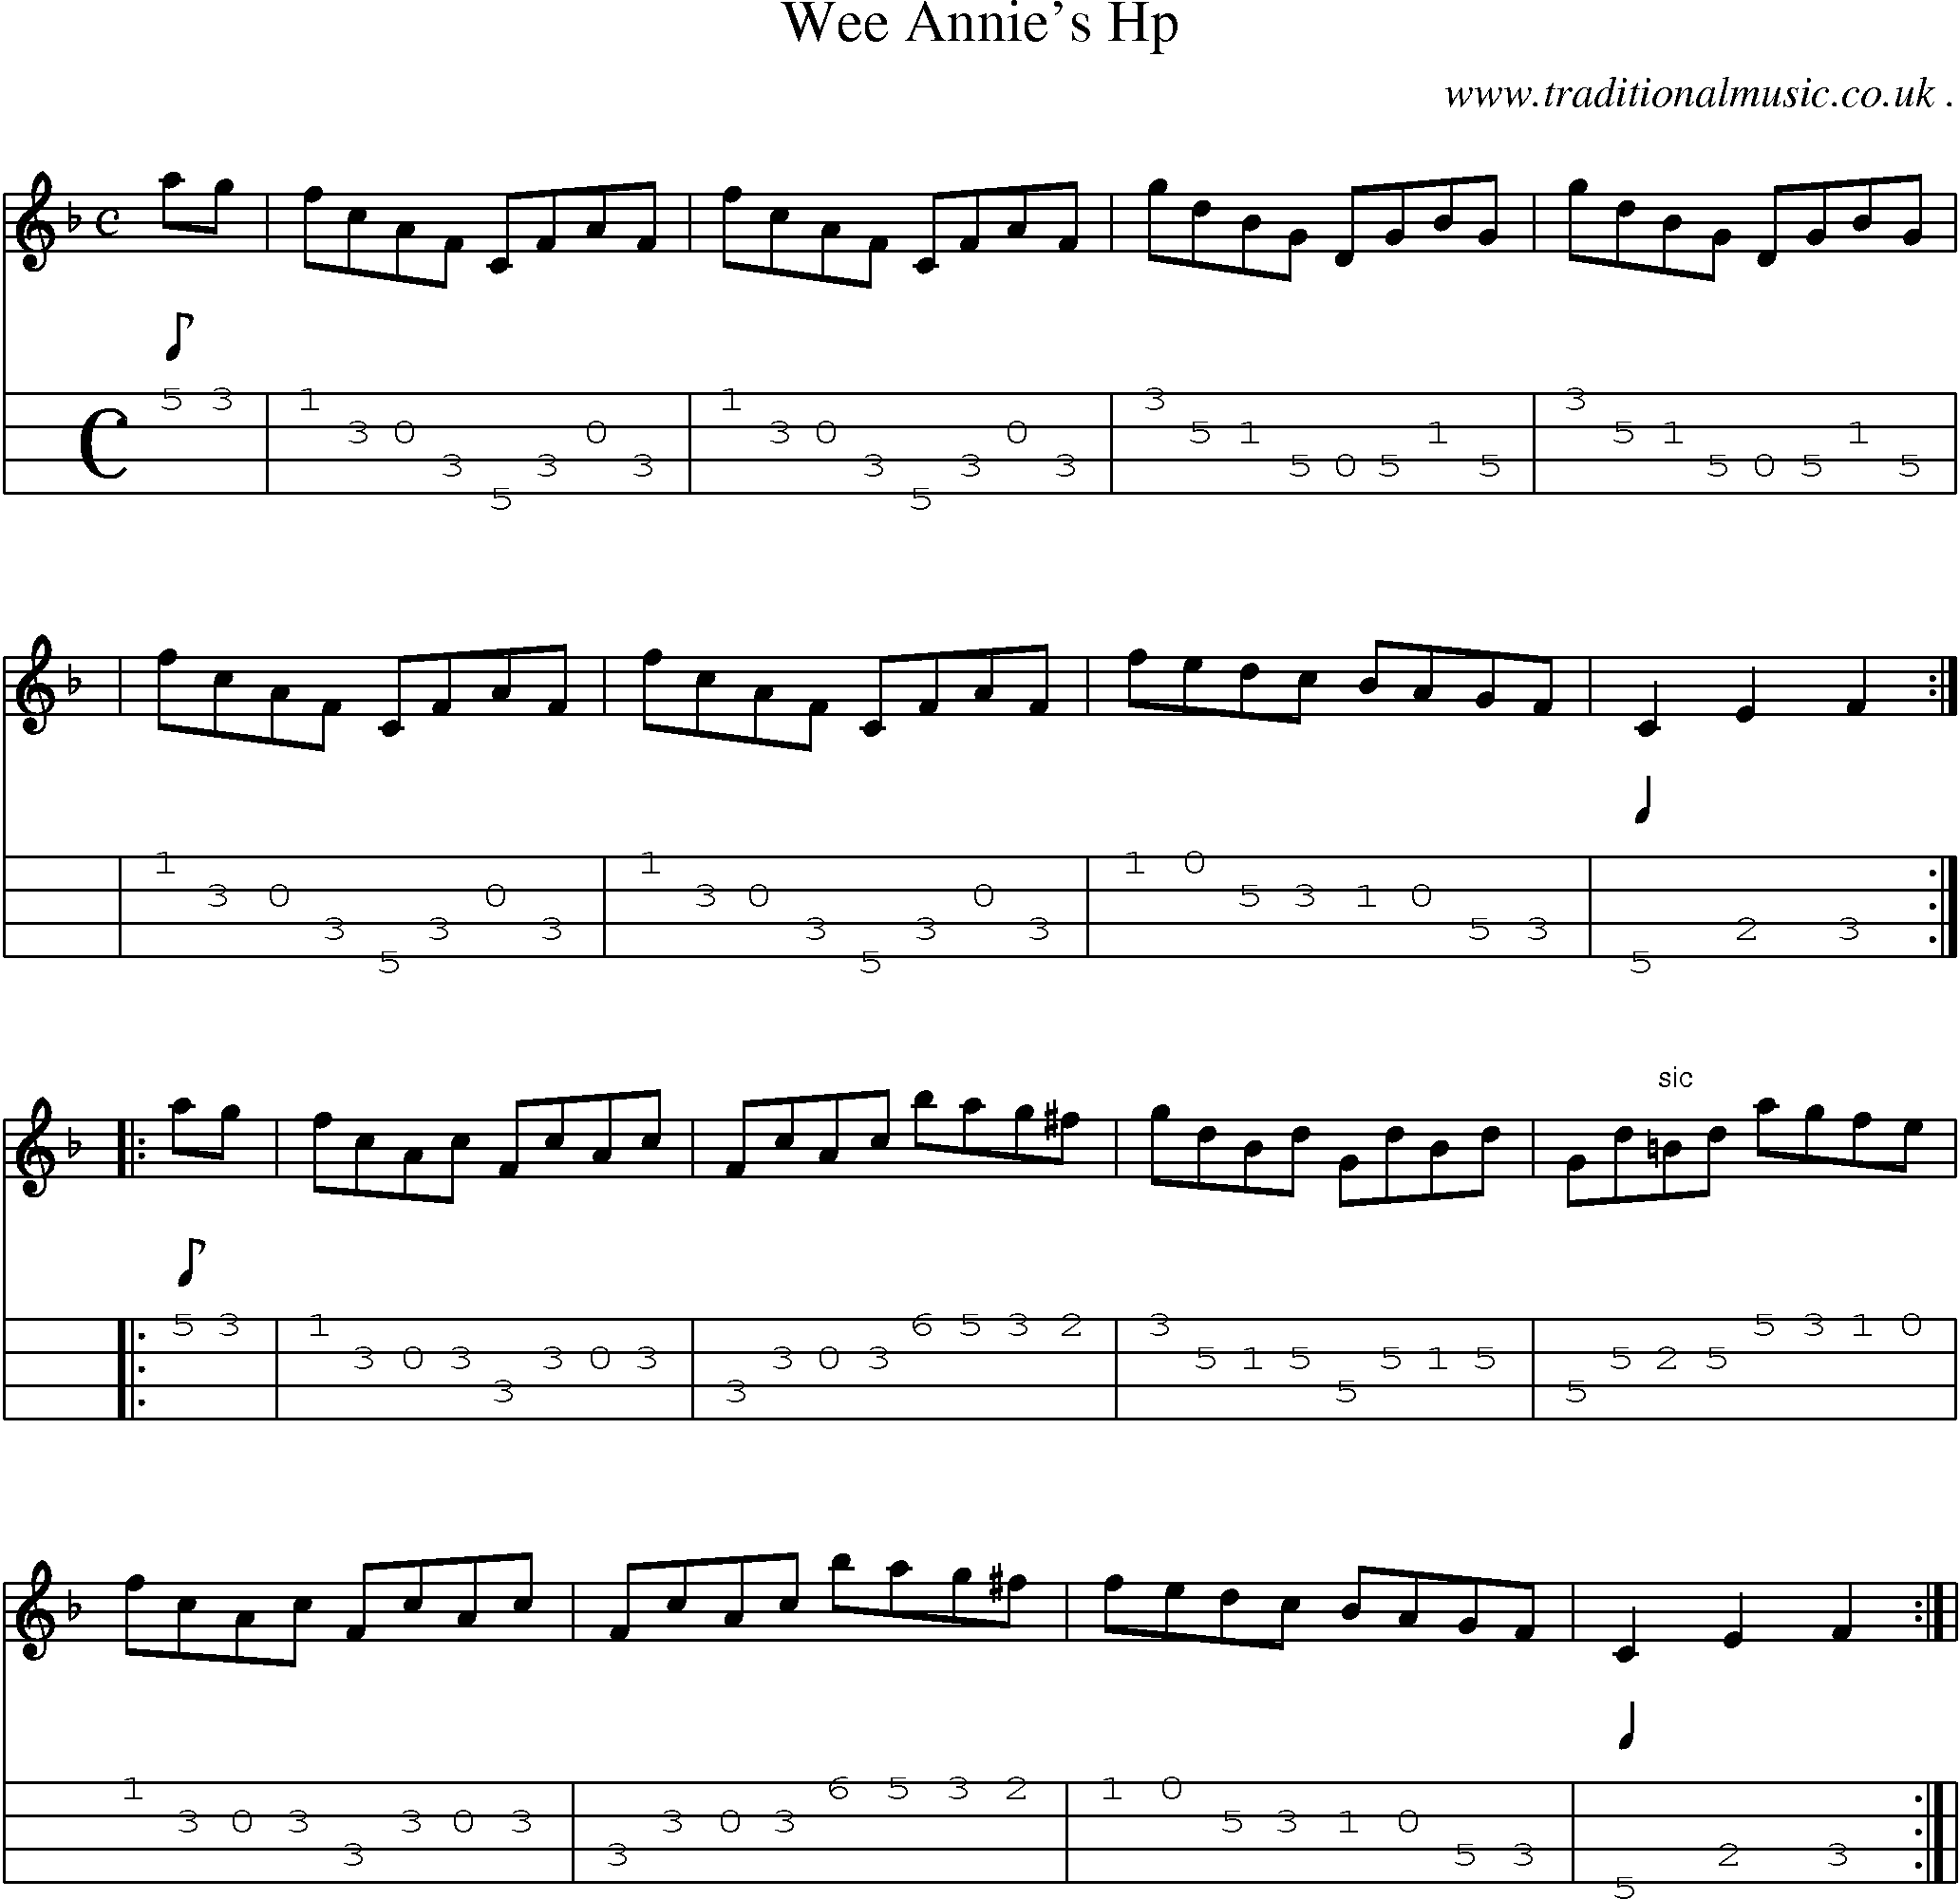 Sheet-Music and Mandolin Tabs for Wee Annies Hp